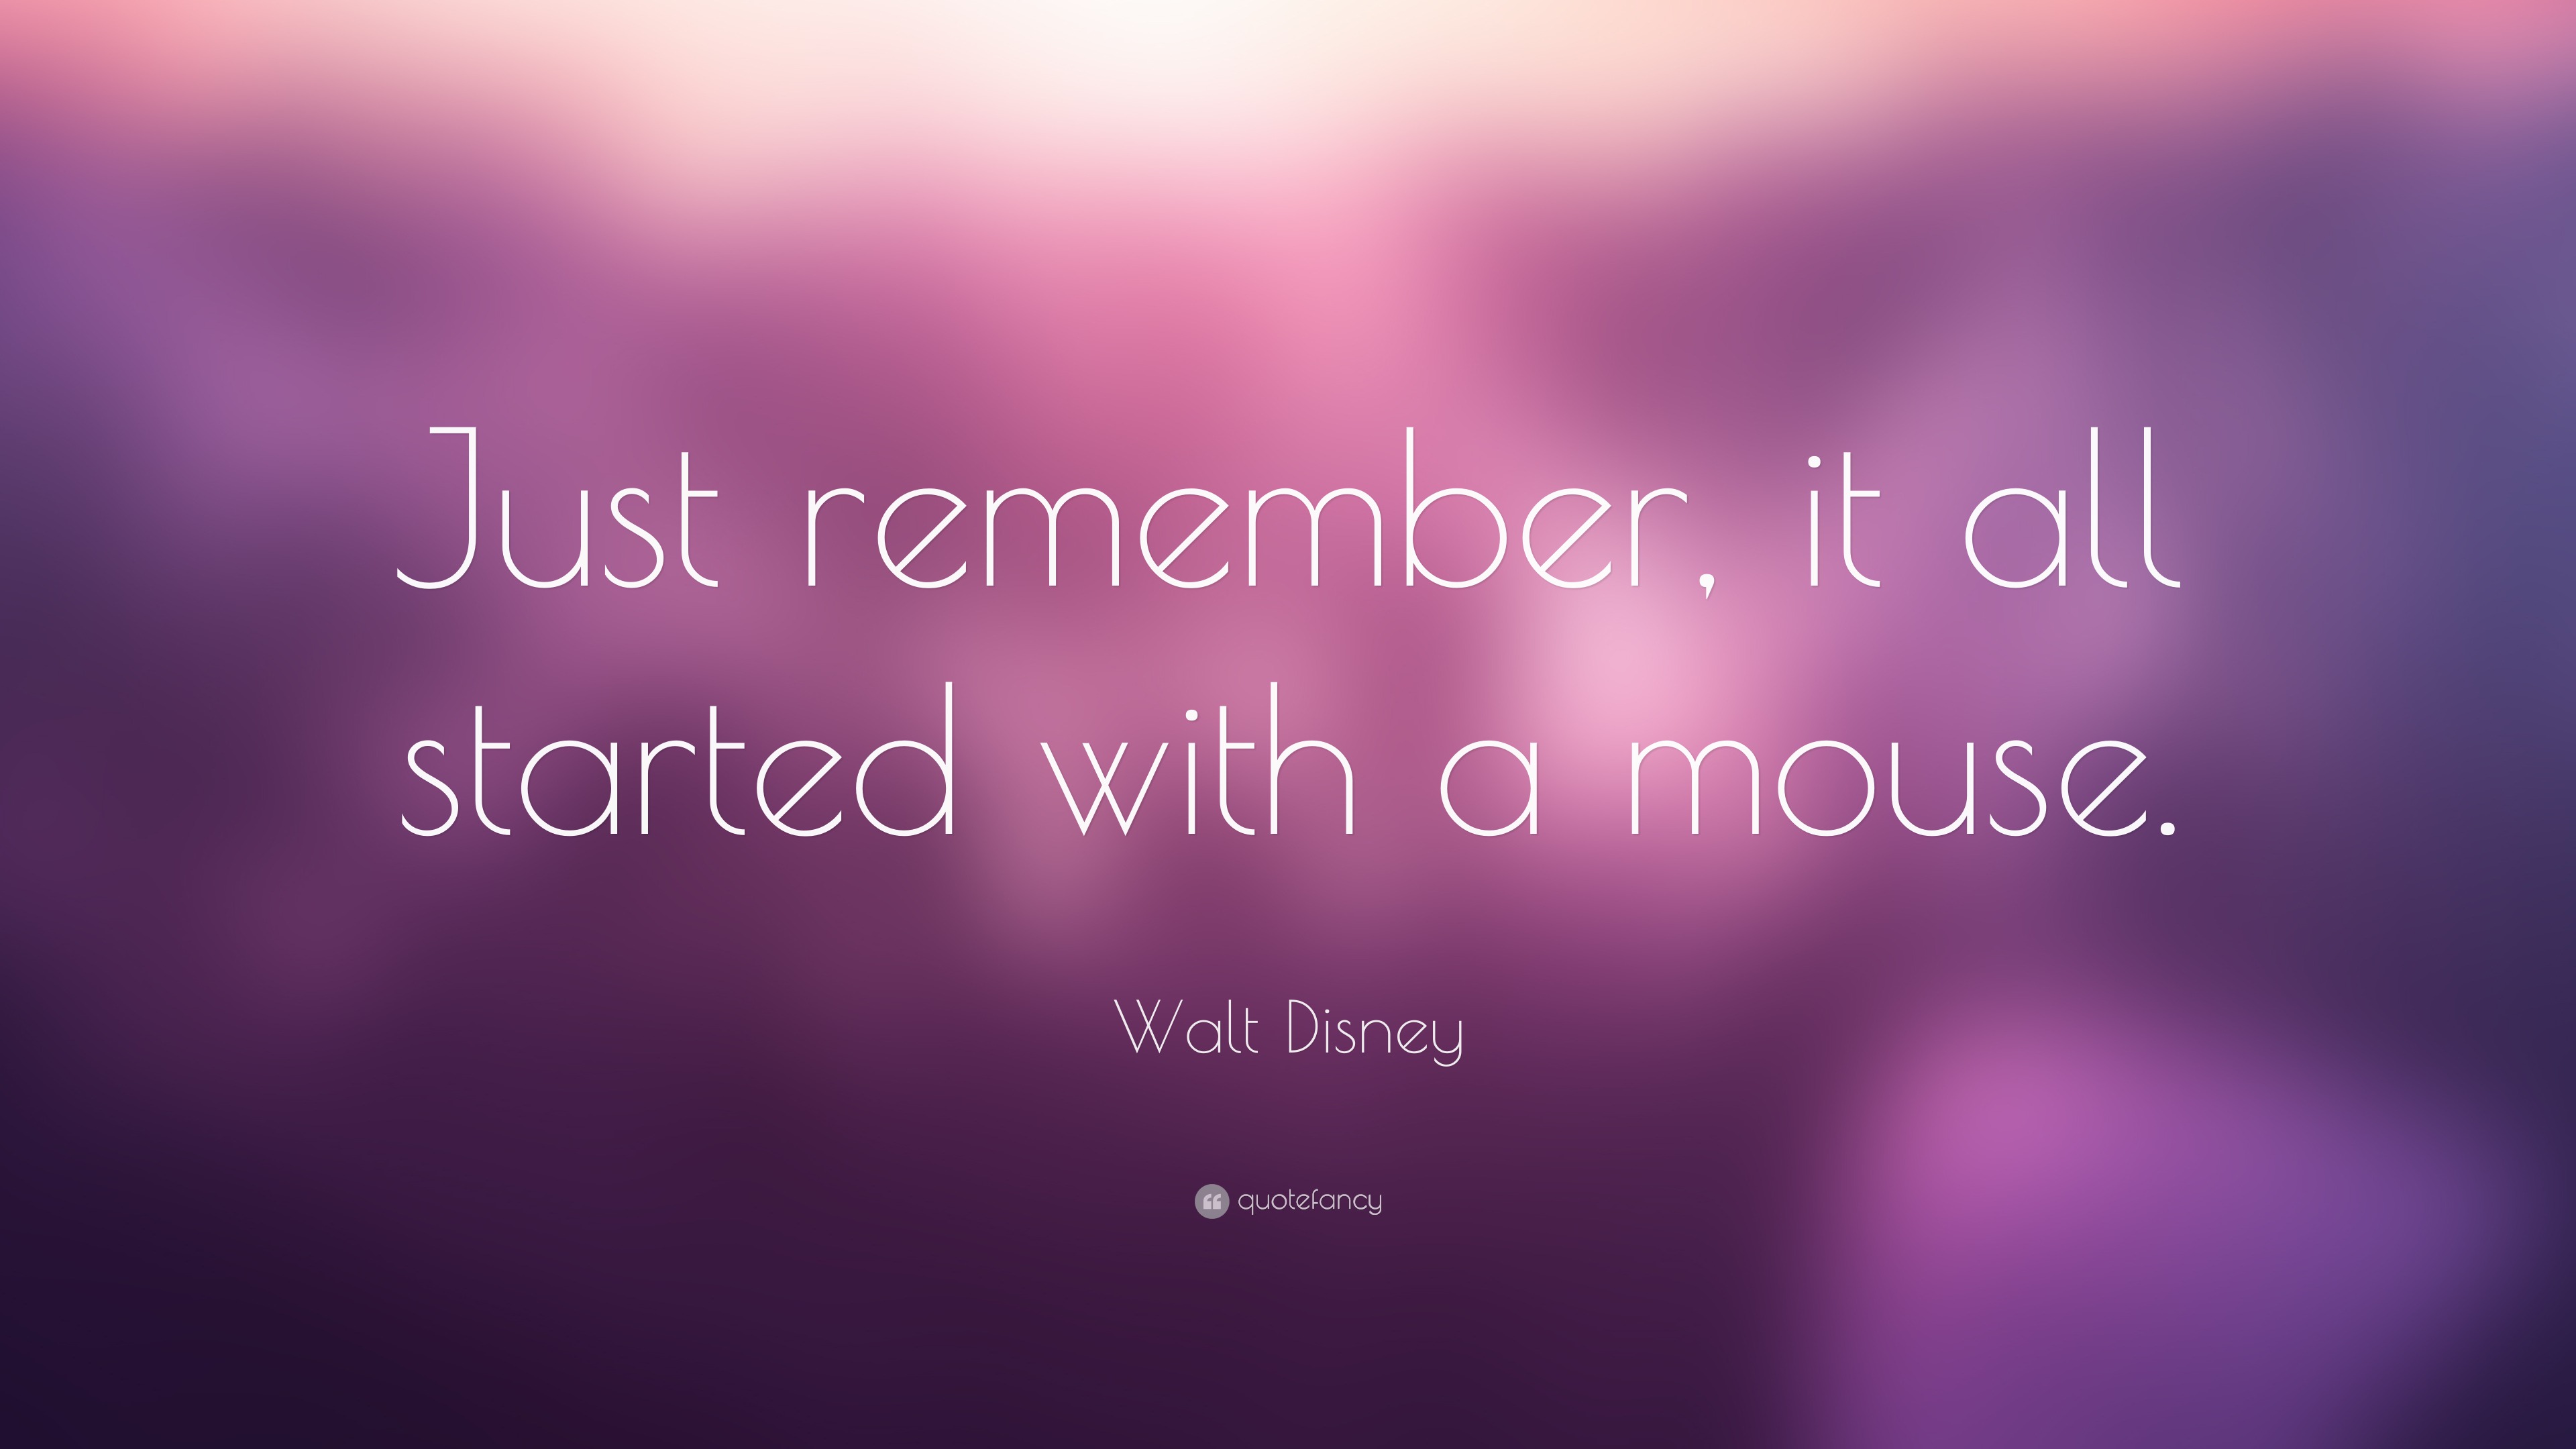 Walt Disney Quote: "Just remember, it all started with a ...